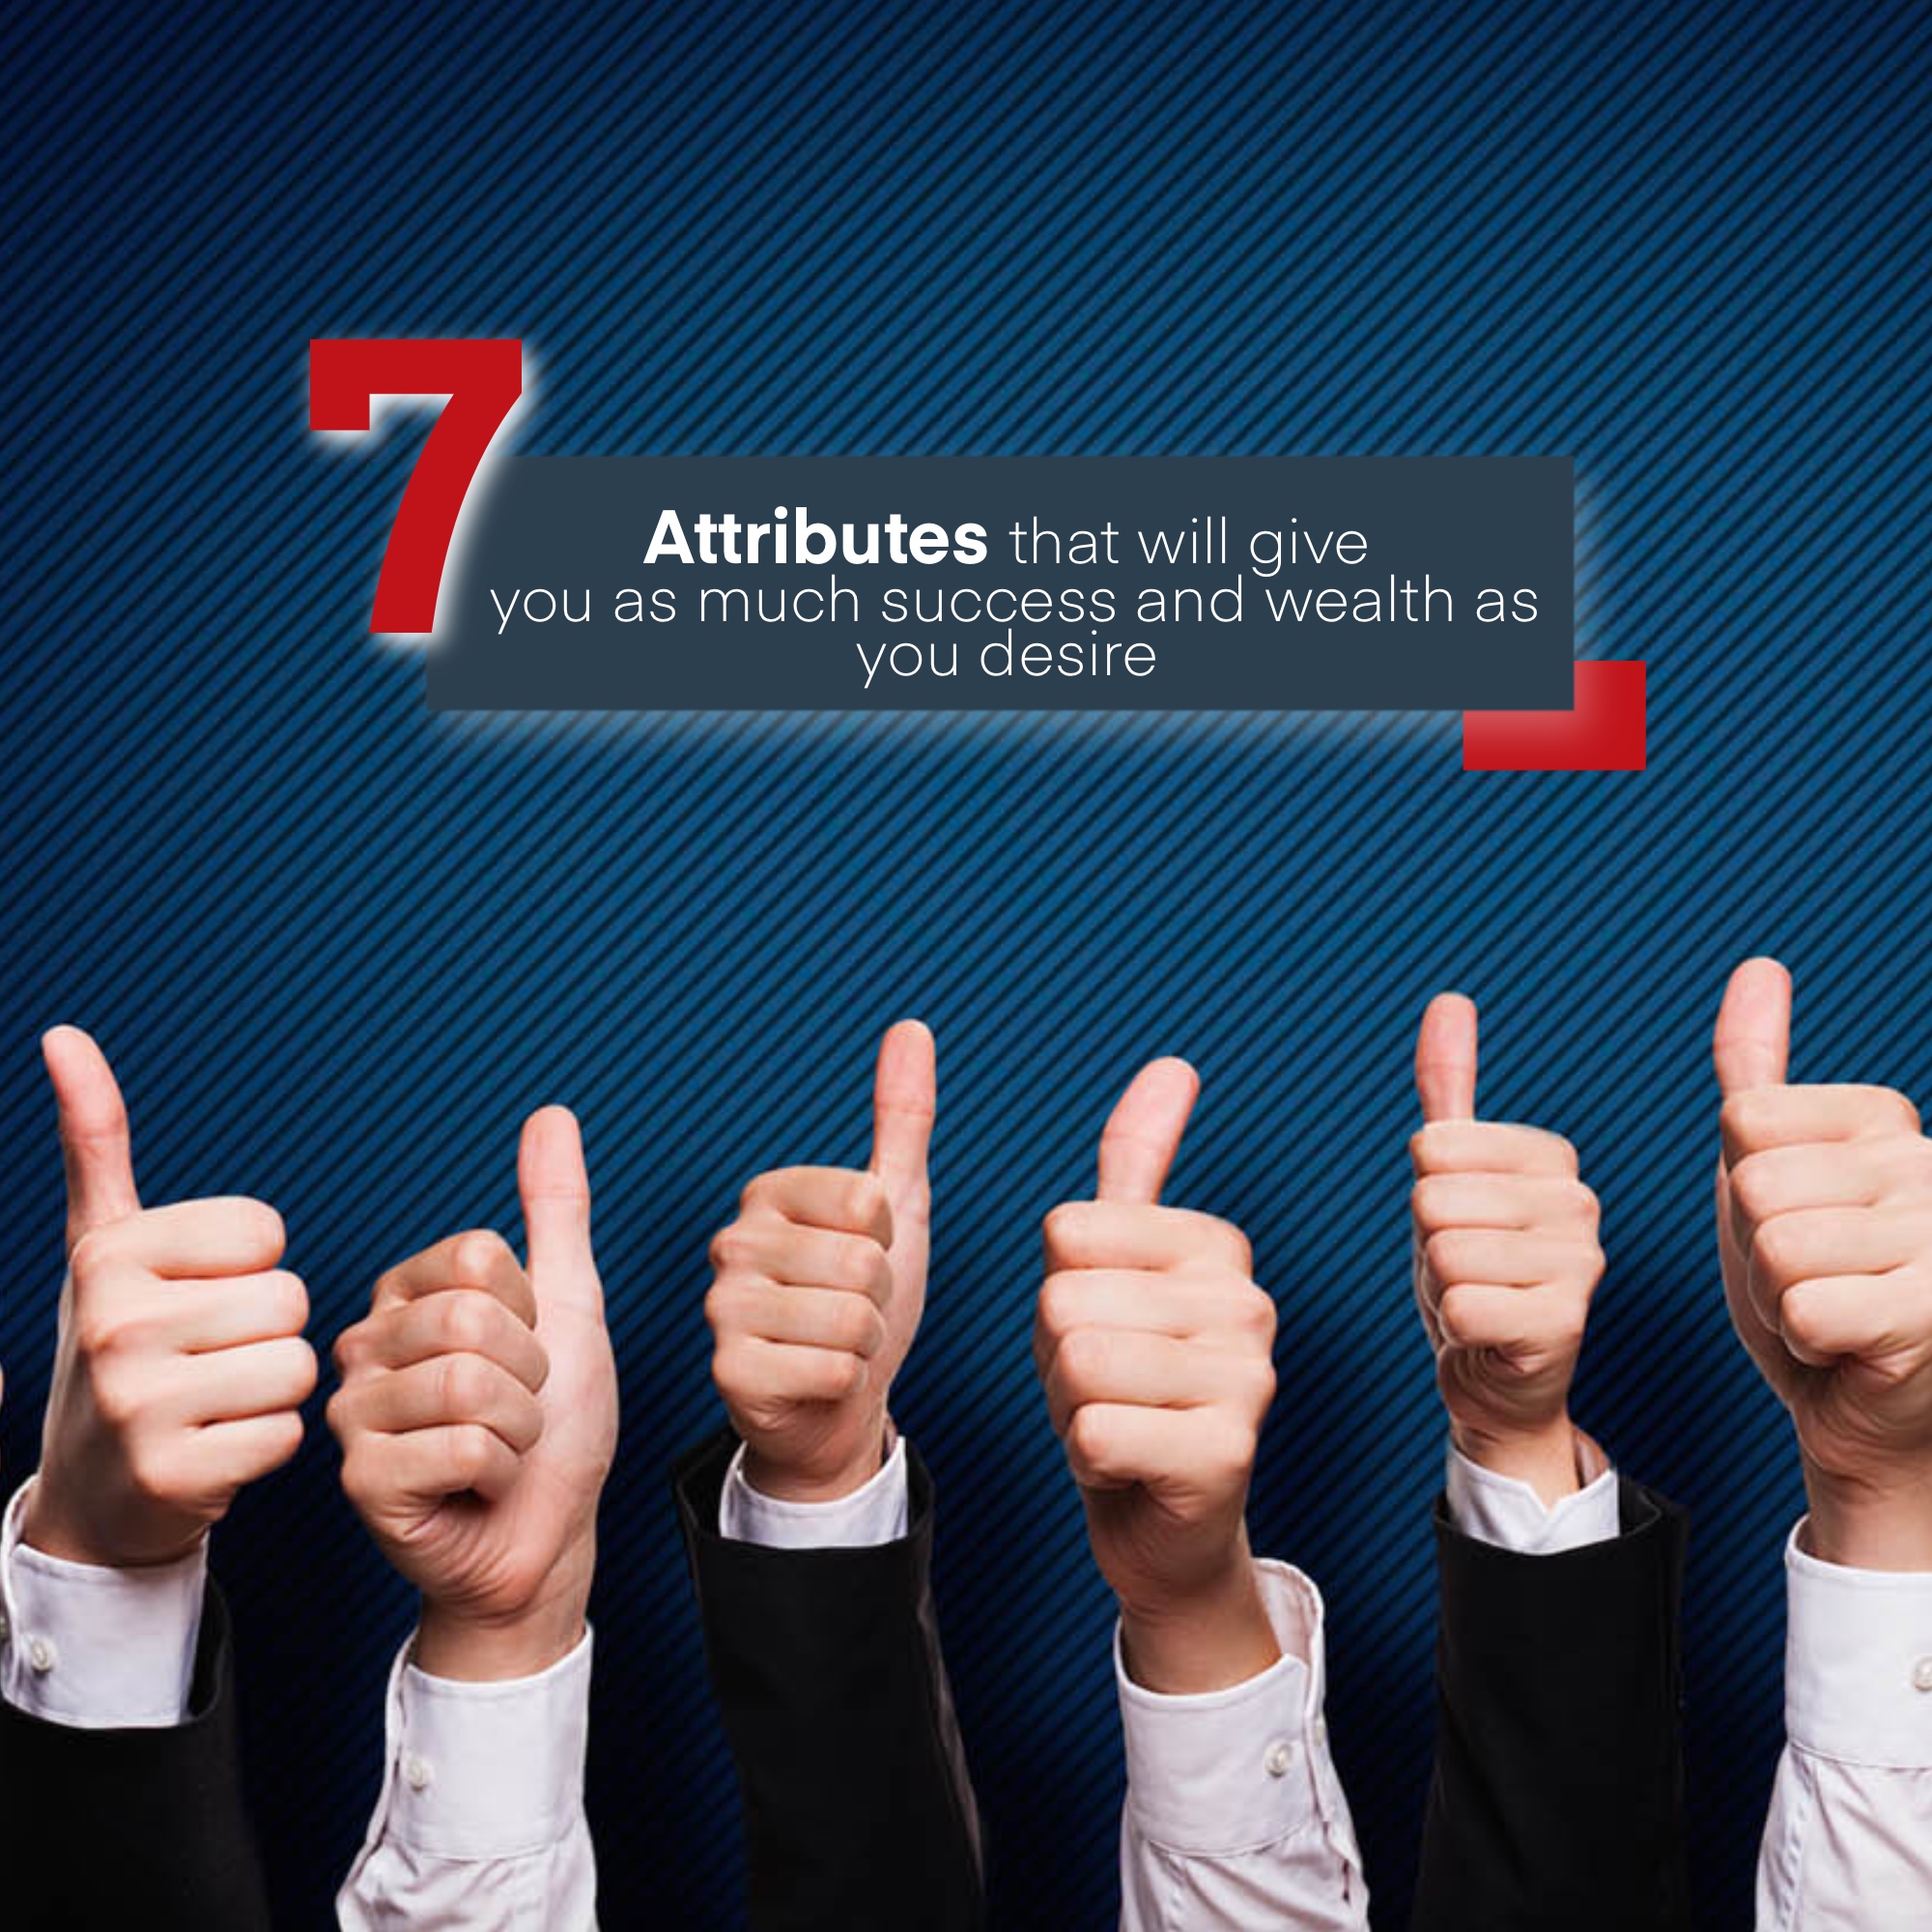 7 attributes that will help grow your business and your wealth